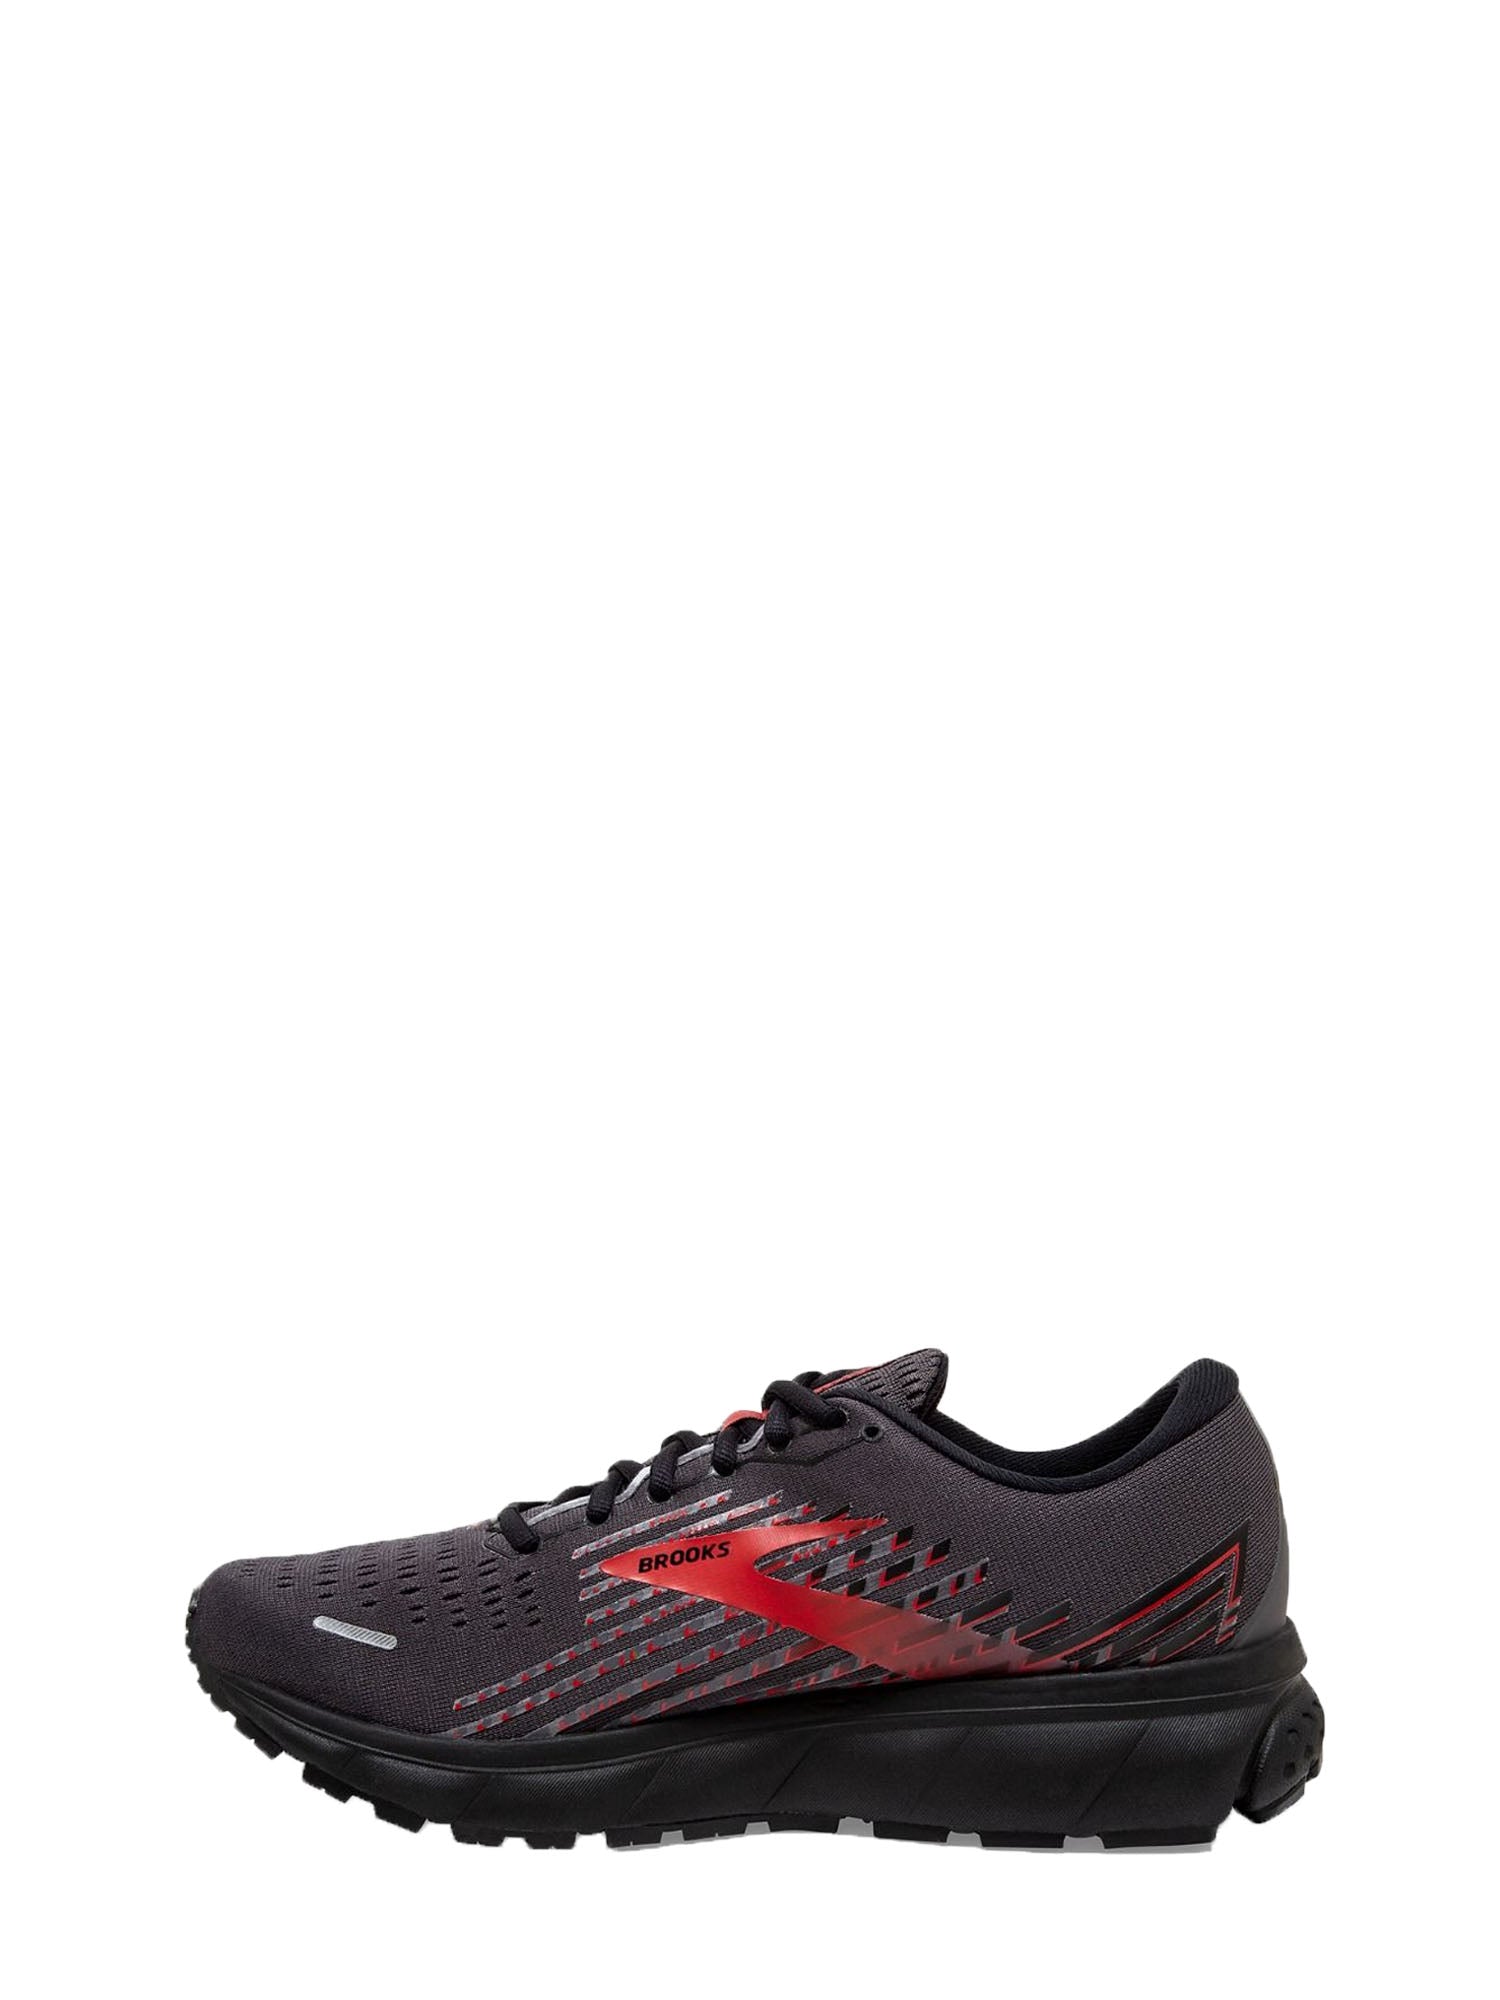 BROOKS SNEAKERS GHOST 13 NERO - ROSSO